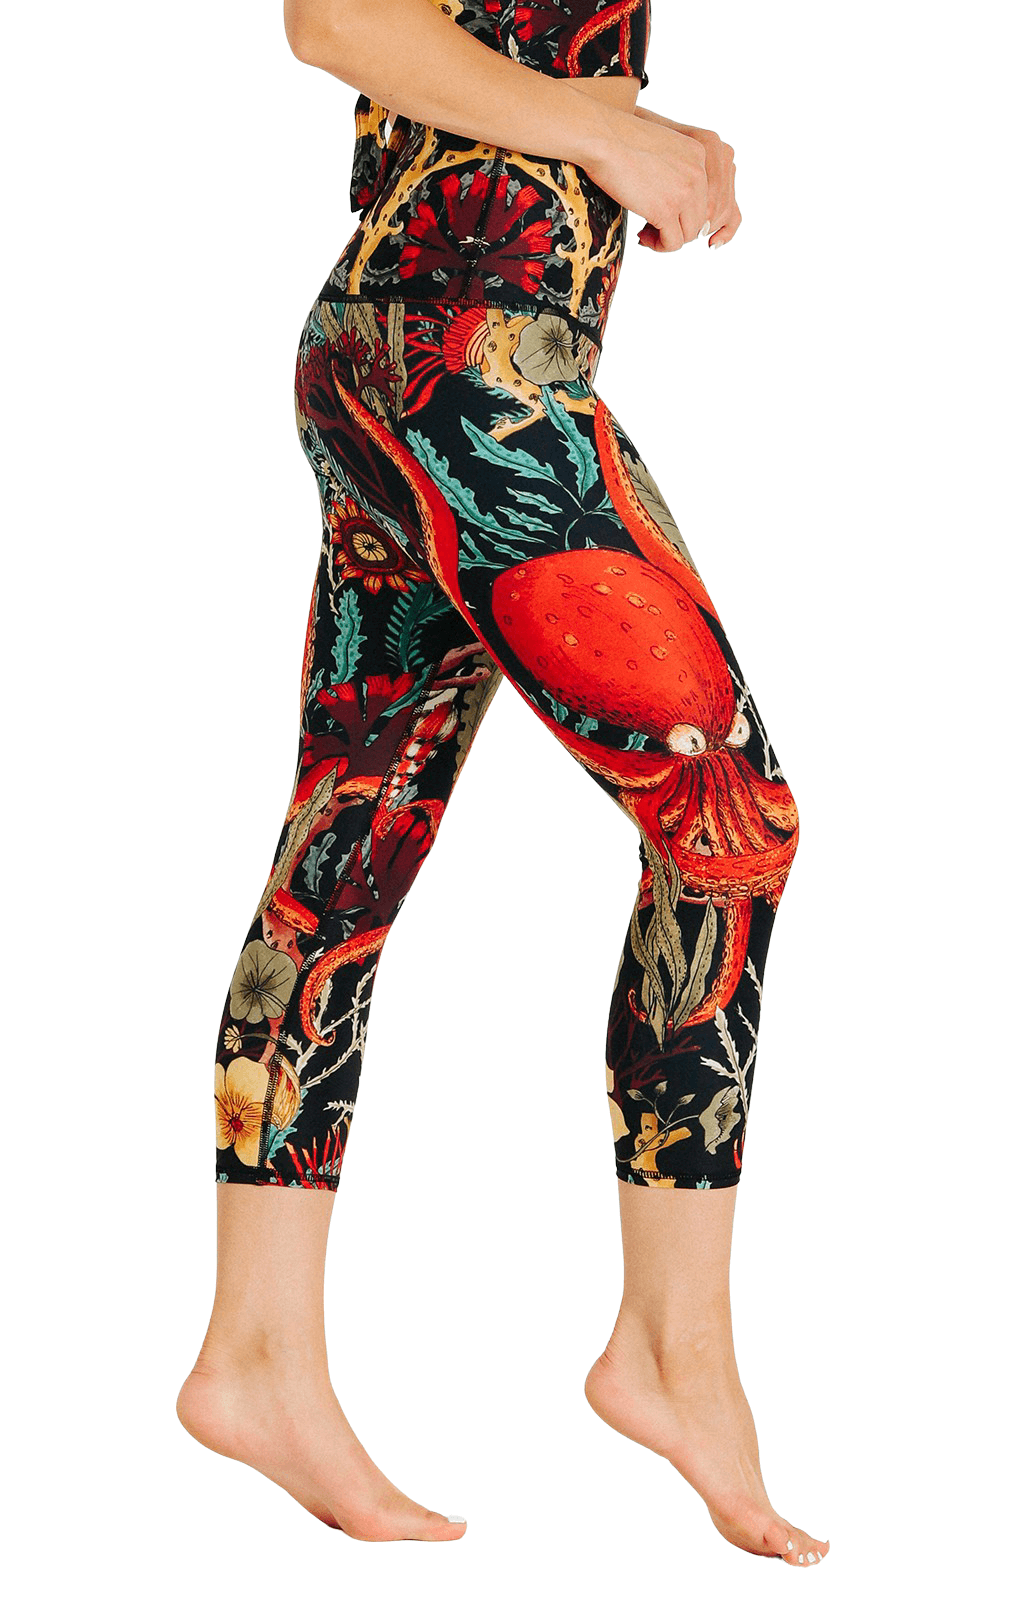 High Waisted Leggings Sewing Pattern for Women,yoga,workshop, Pole